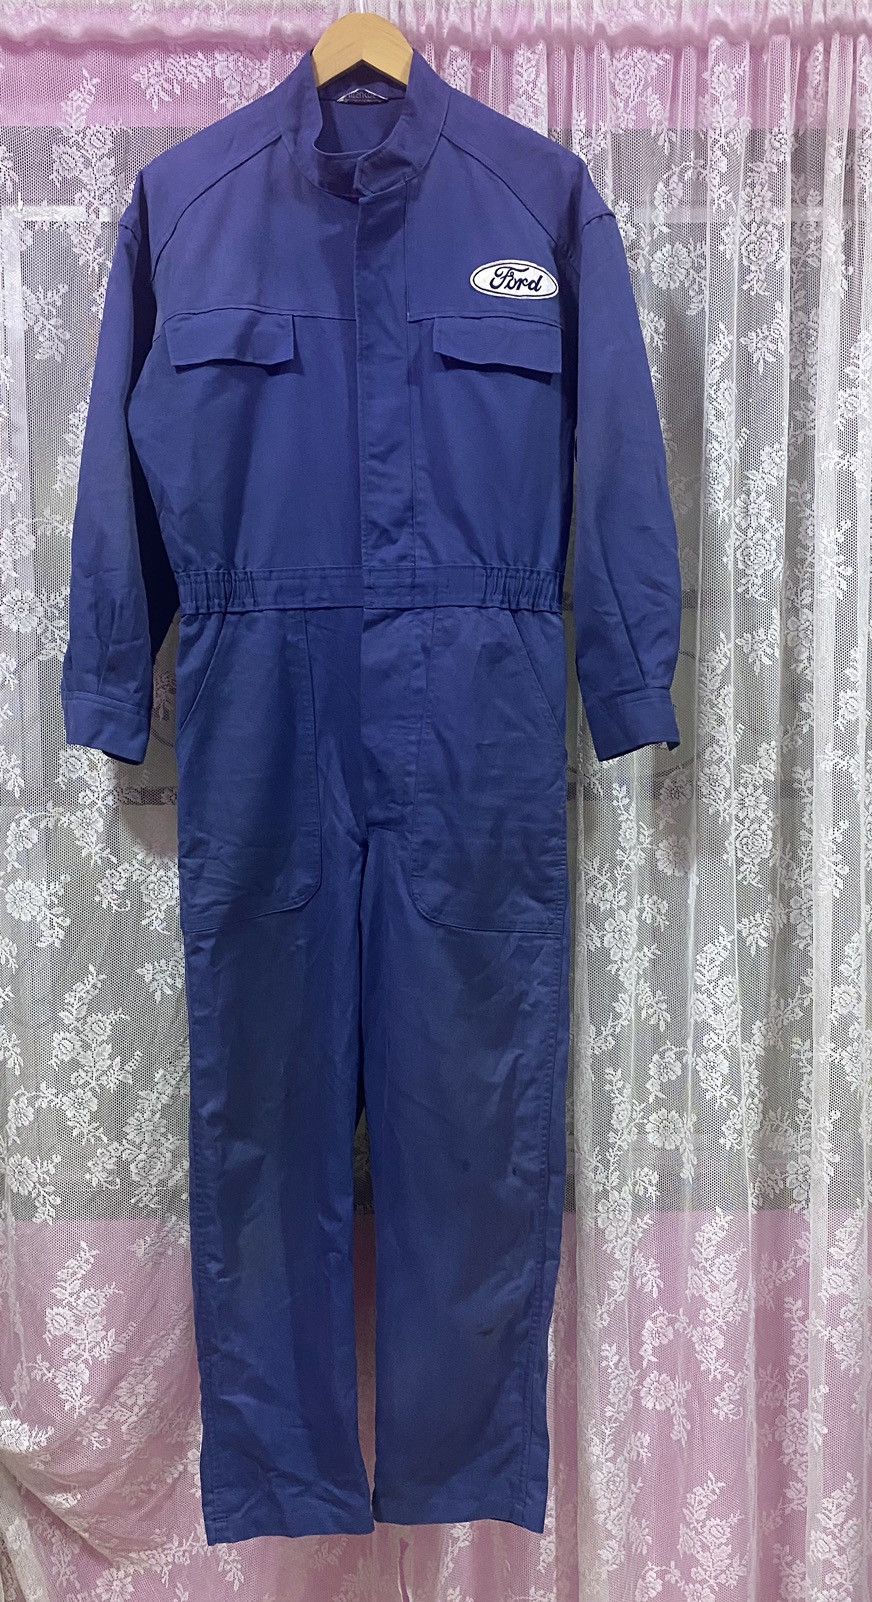 Rare Vintage Ford Racing Boilersuit Coverall Jumpsuit - 1